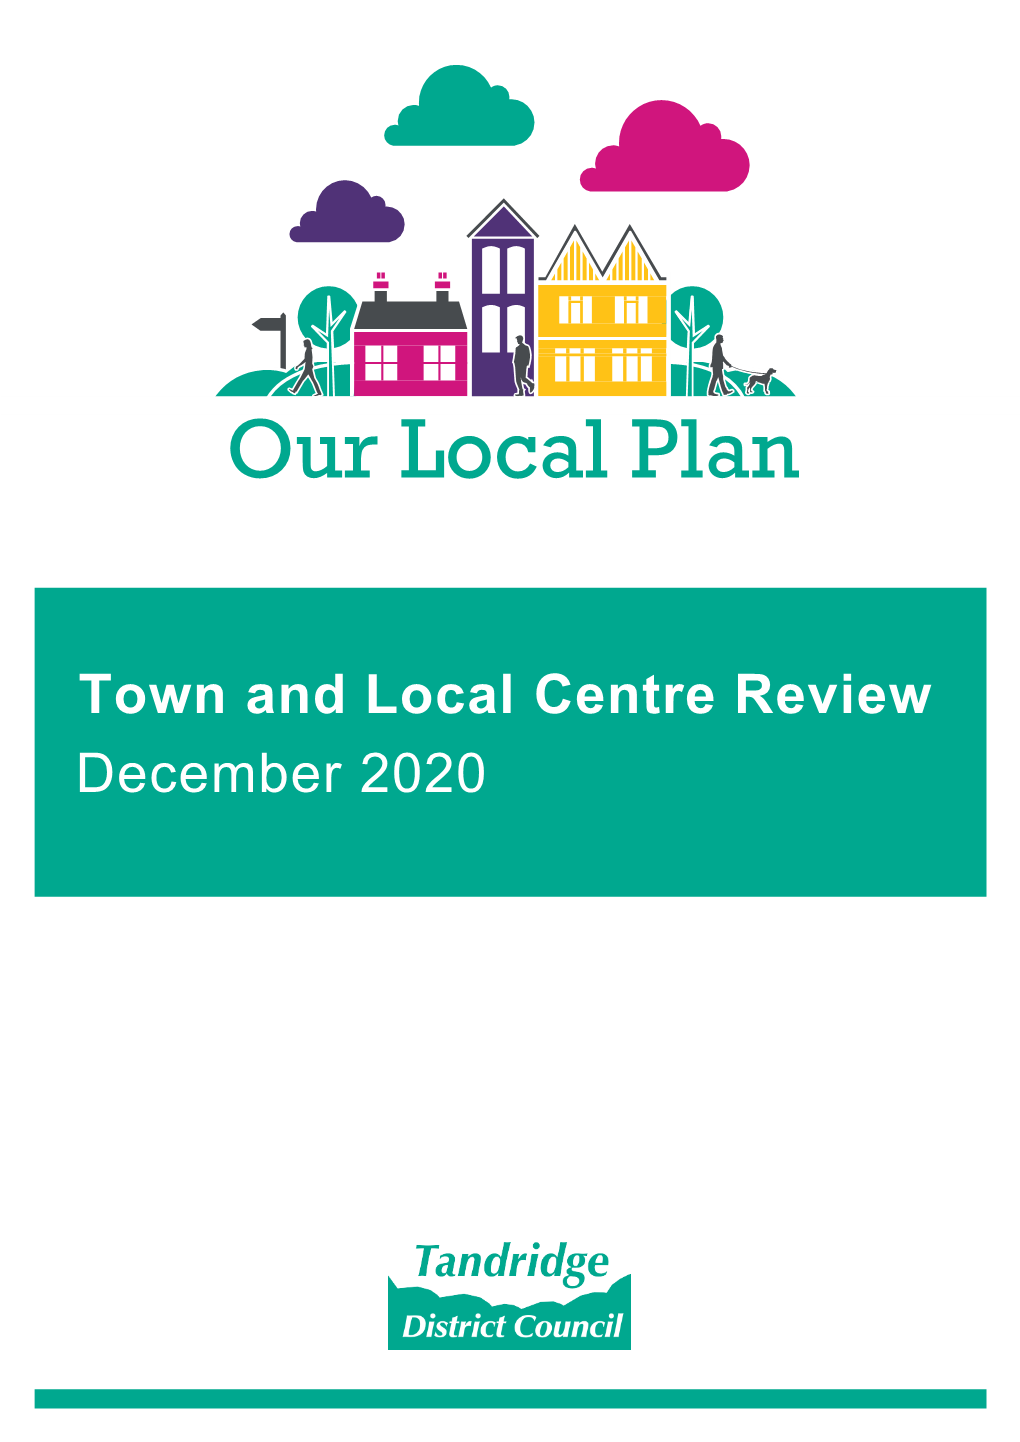 Town and Local Centre Review December 2020